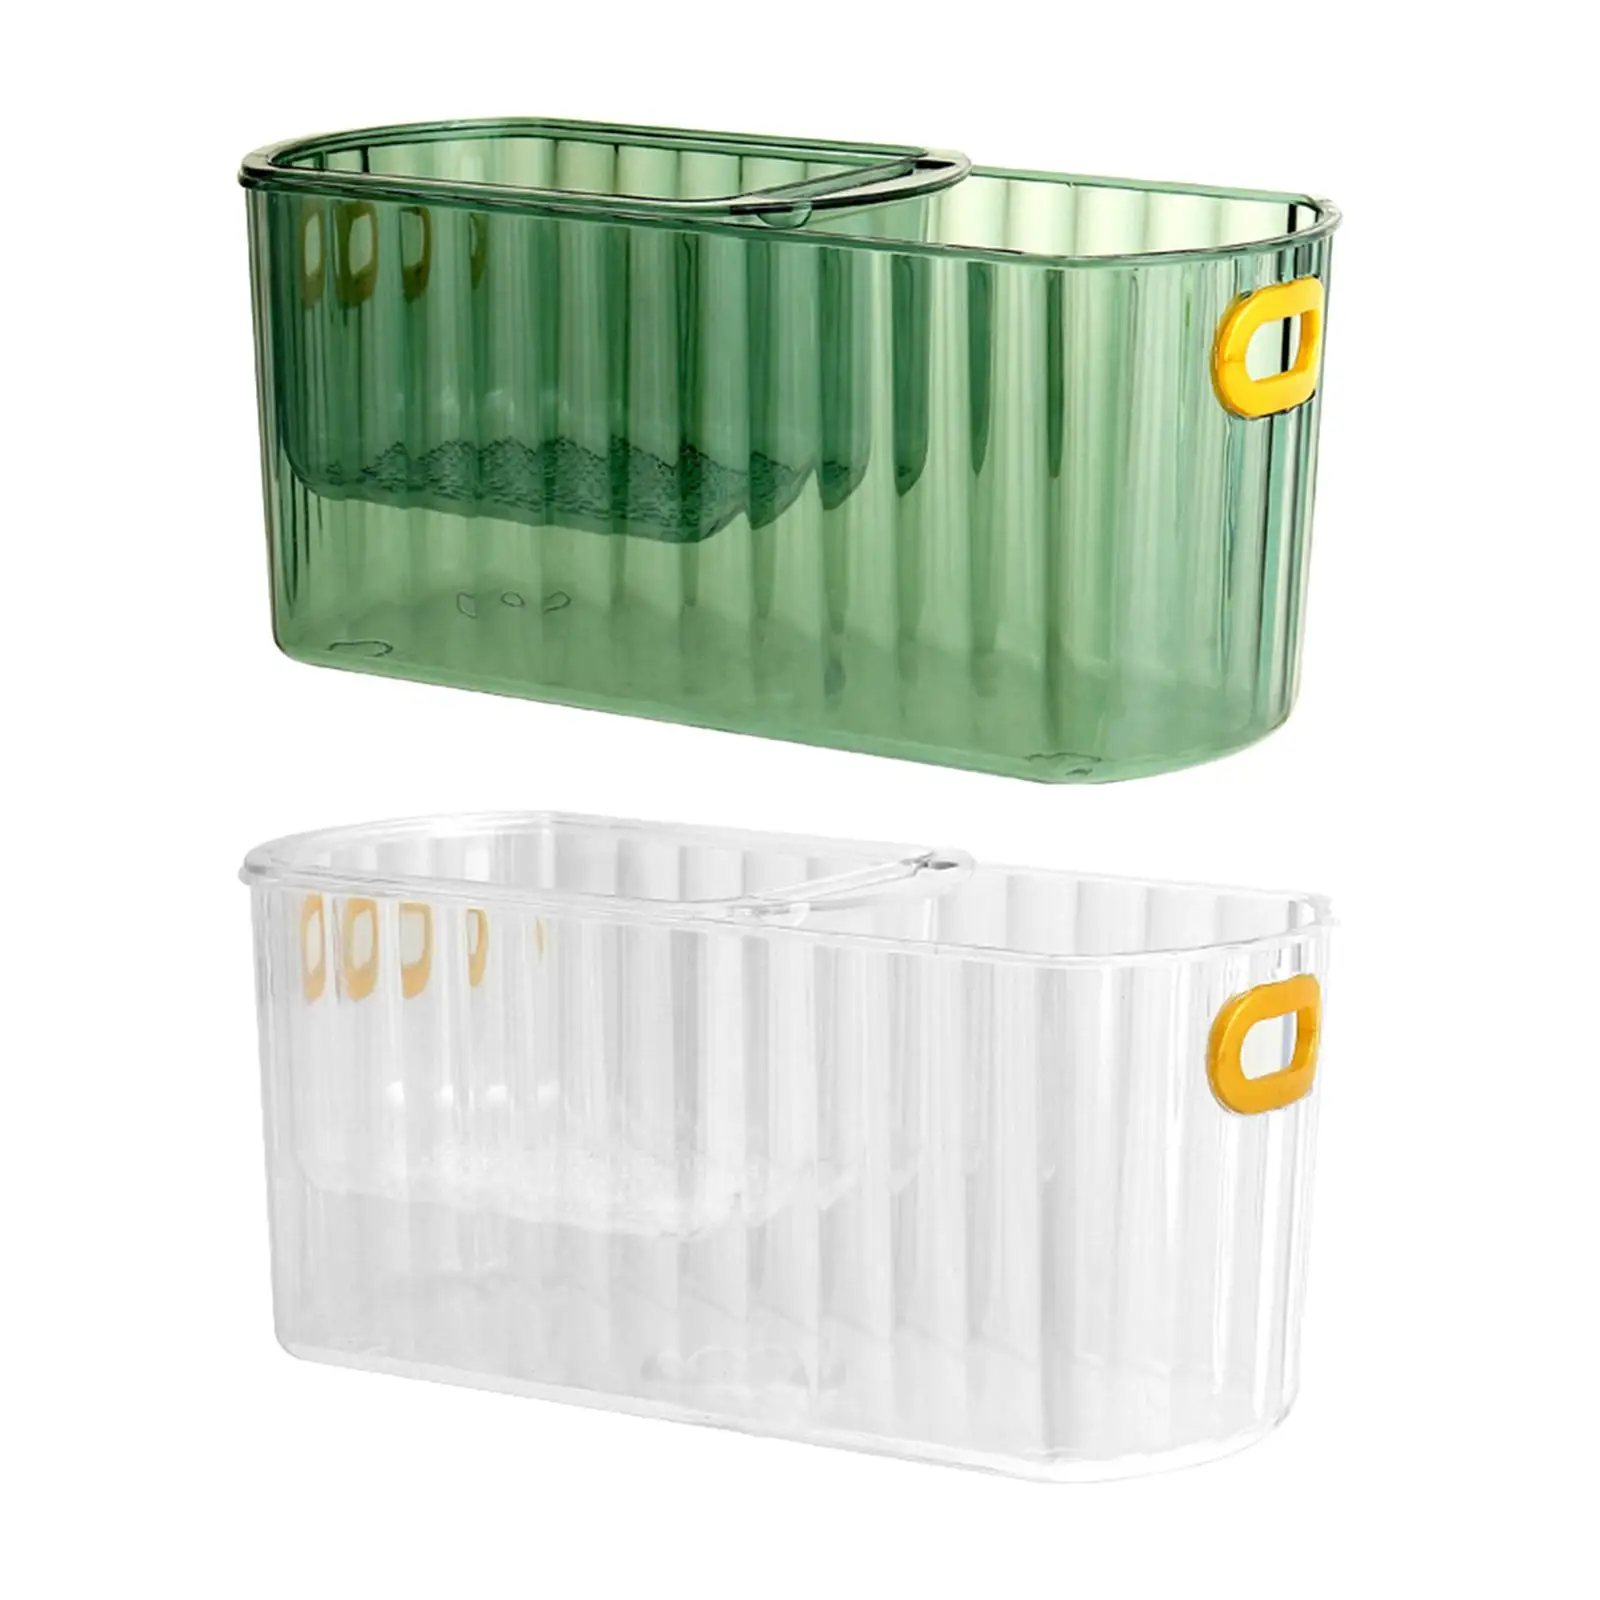 Multifunctional Fruits Storage Basket Separate Tea Residues with Drain Hole Candy Box Snack Tray for Living Room Home Decoration